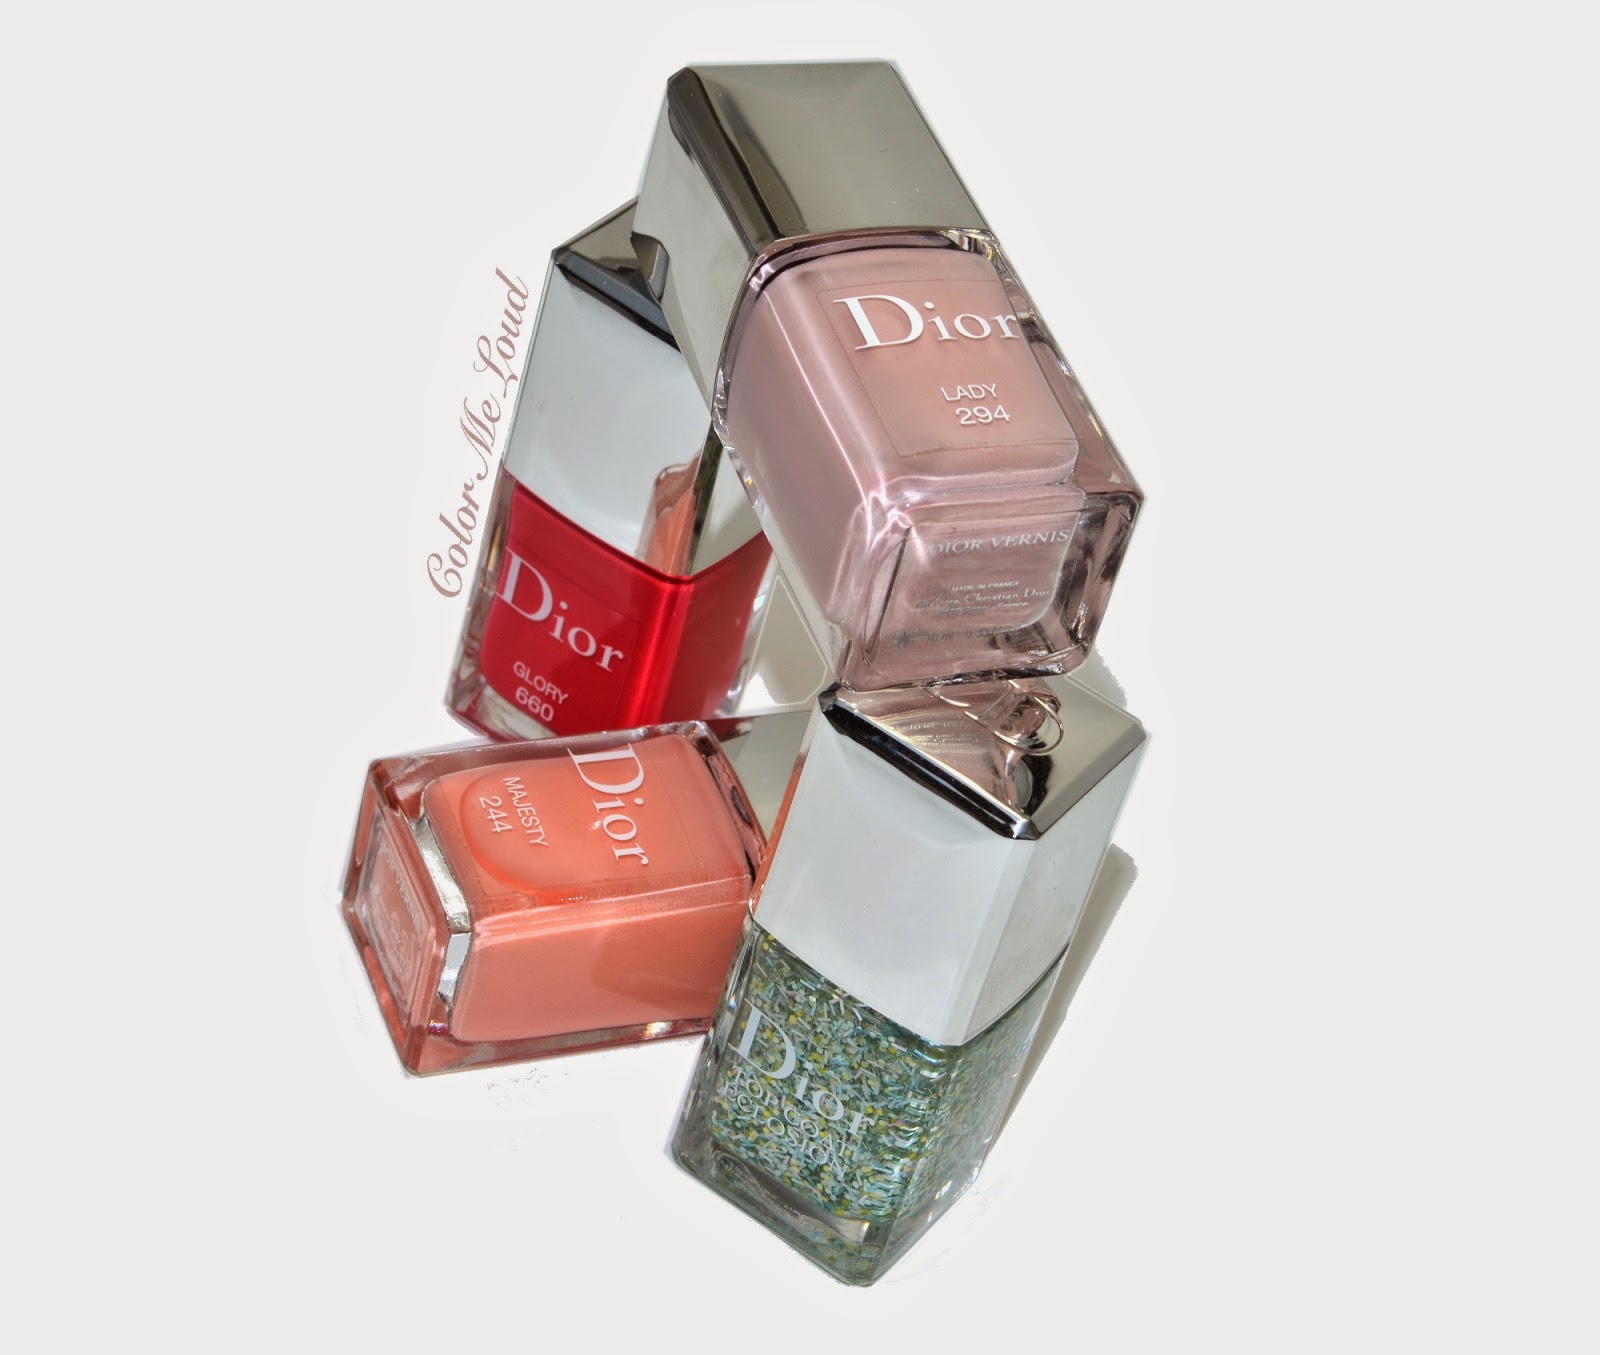 Dior Vernis #294 Lady, #244 Majesty, #660 Glory and Eclosion Top Coat Swatches & Comparison, Spring 2015 Kingdom of Colors Collection